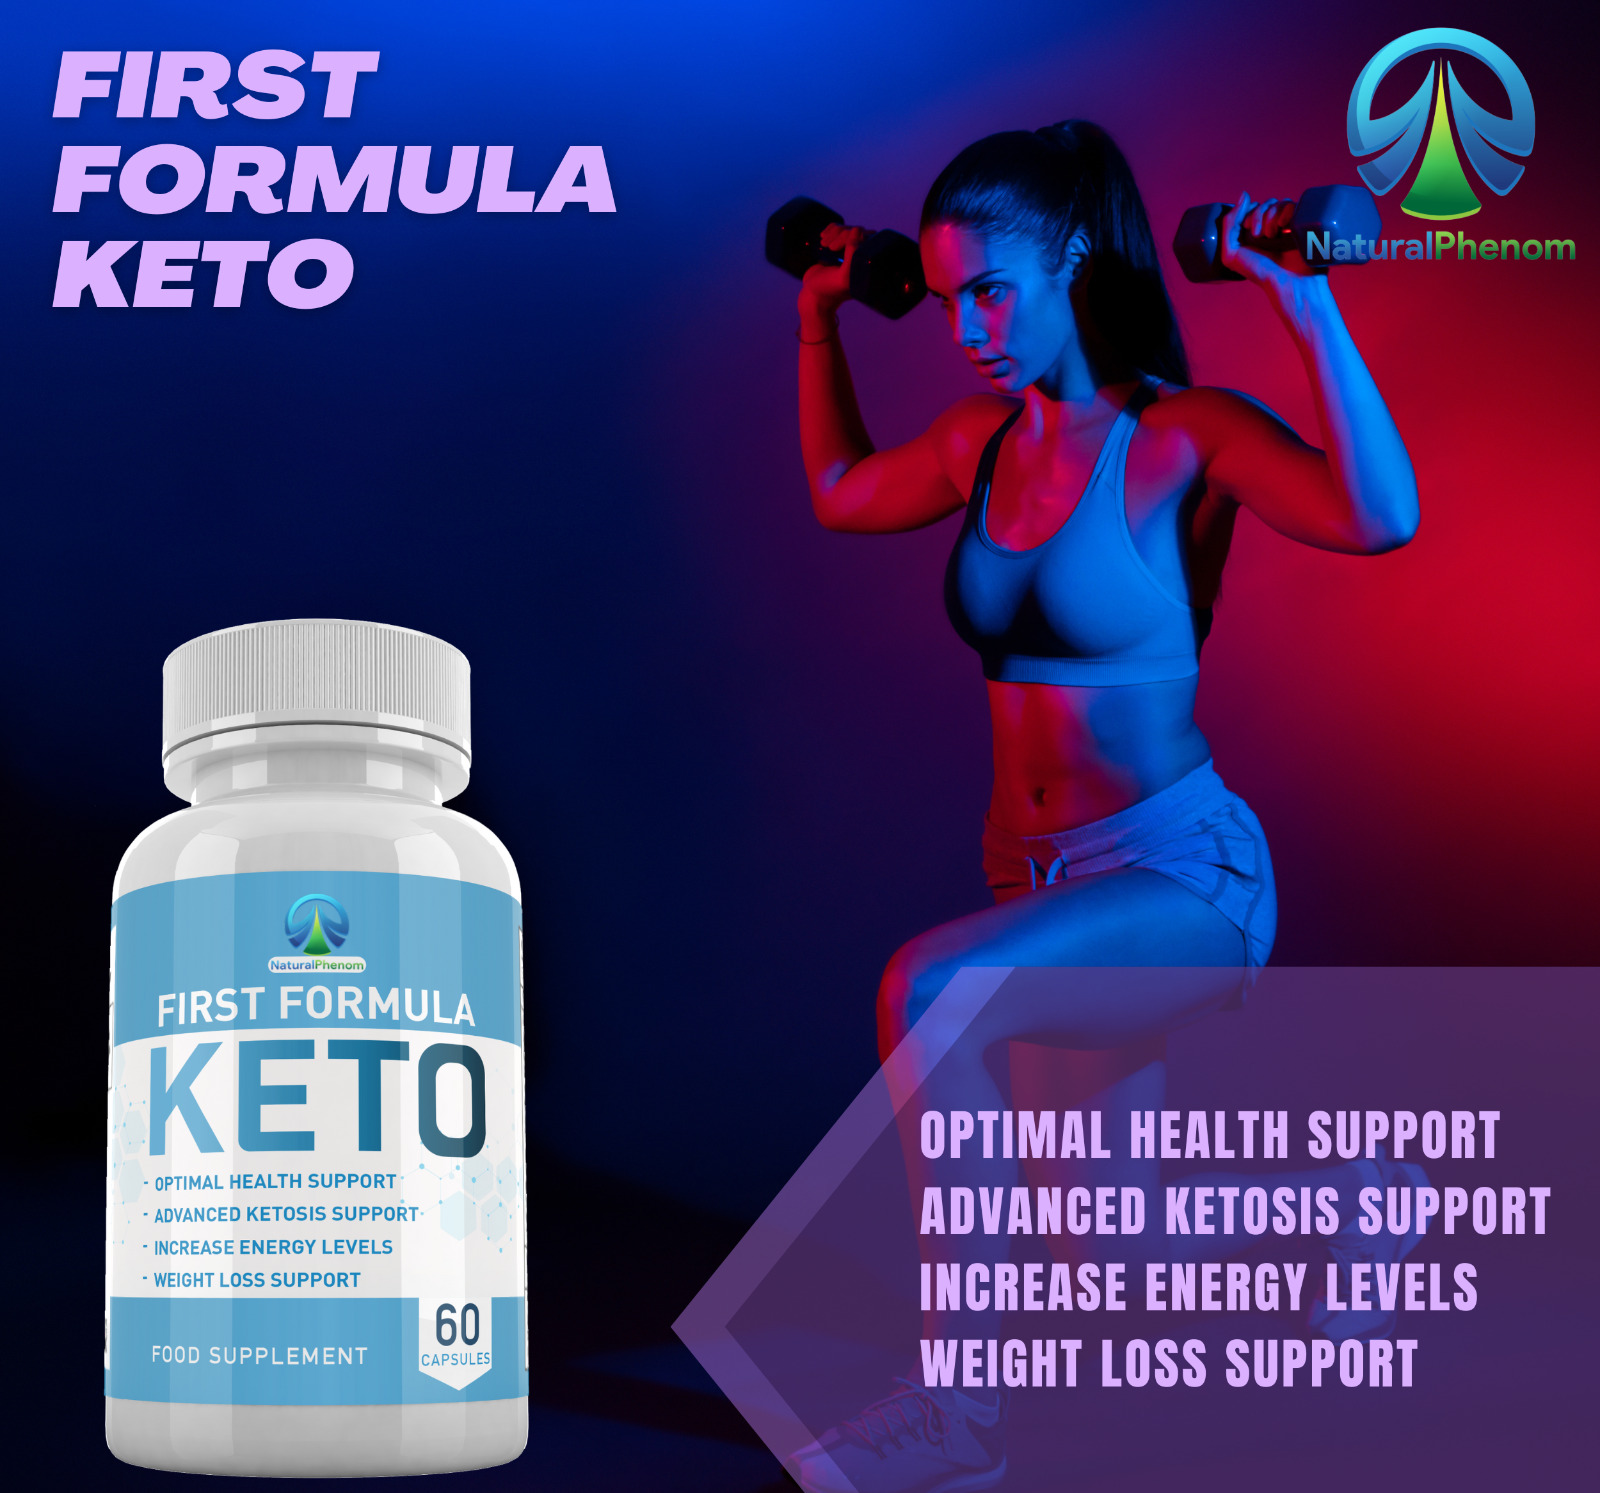 First Formula Keto 60 Capsules Weight Loss Support - NaturalPhenom